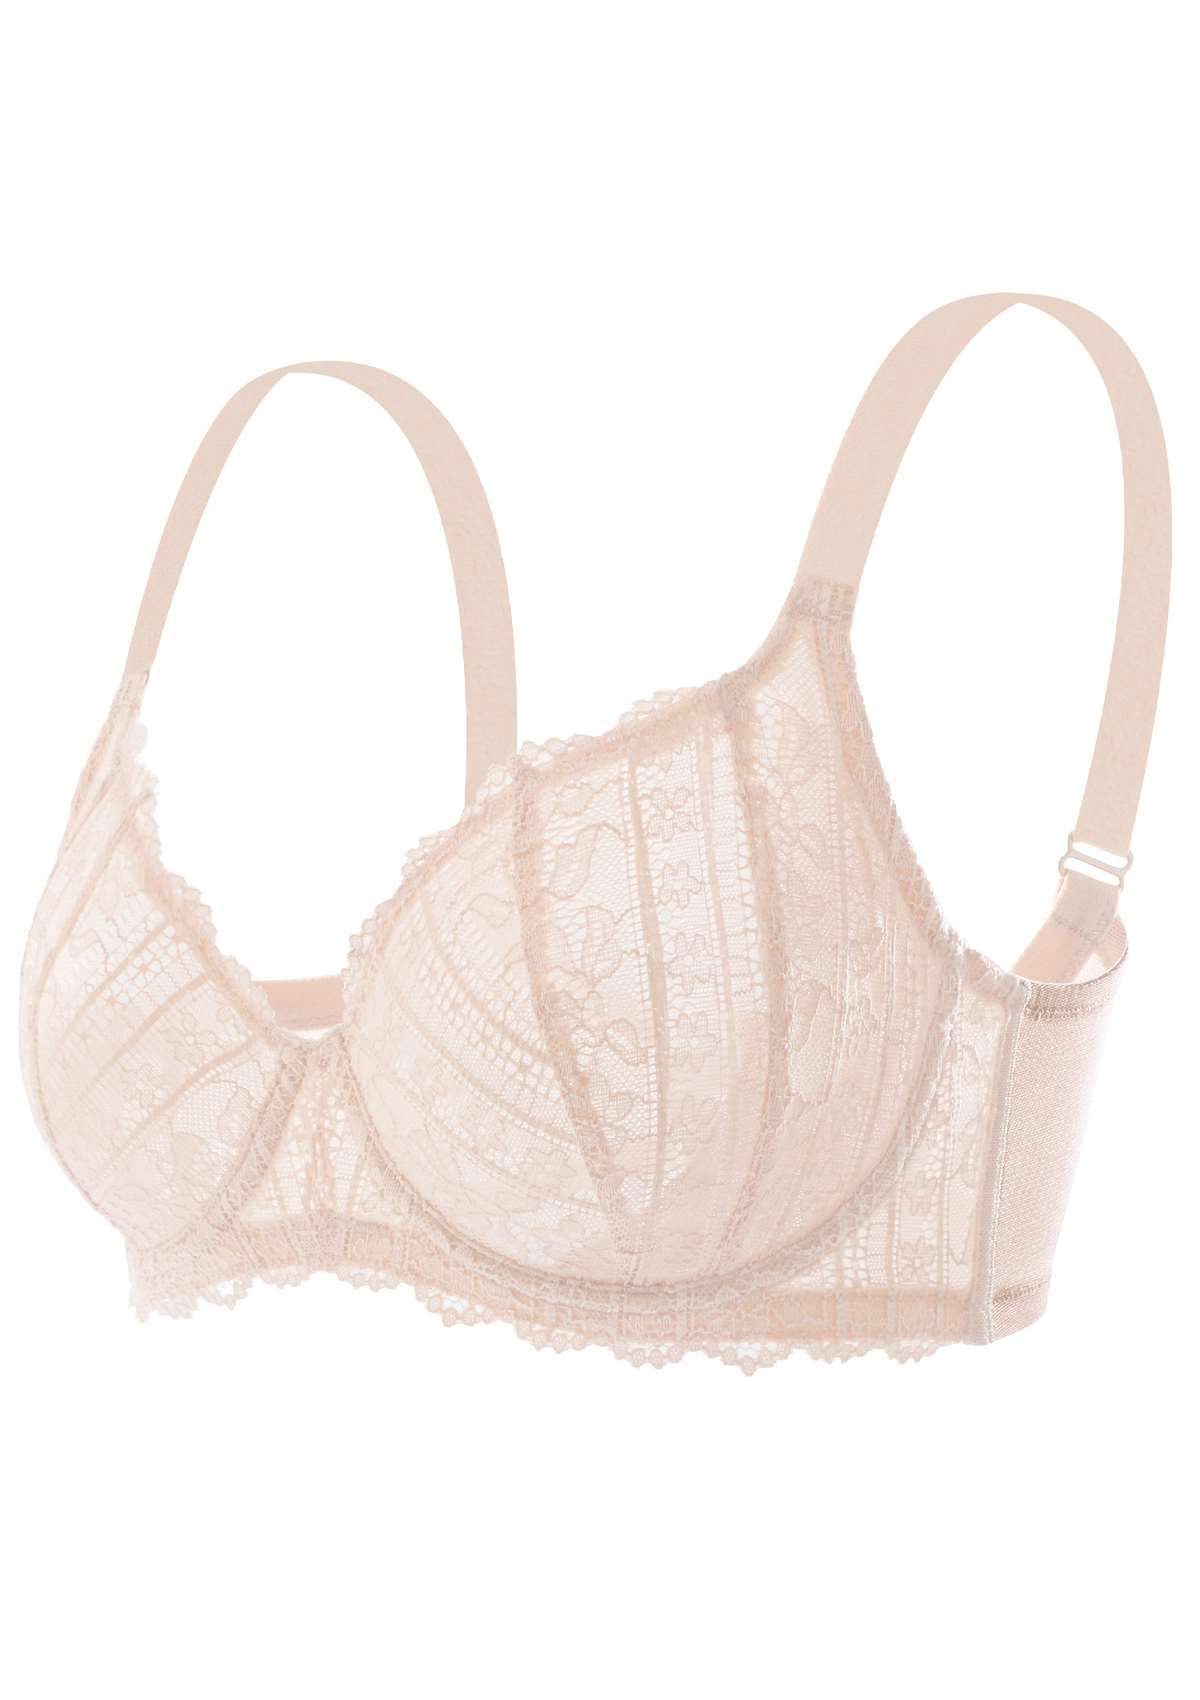 HSIA Vertical Lace Up Bra: Plus Size Back Smoothing Bra - Light Pink / 36 / DD/E